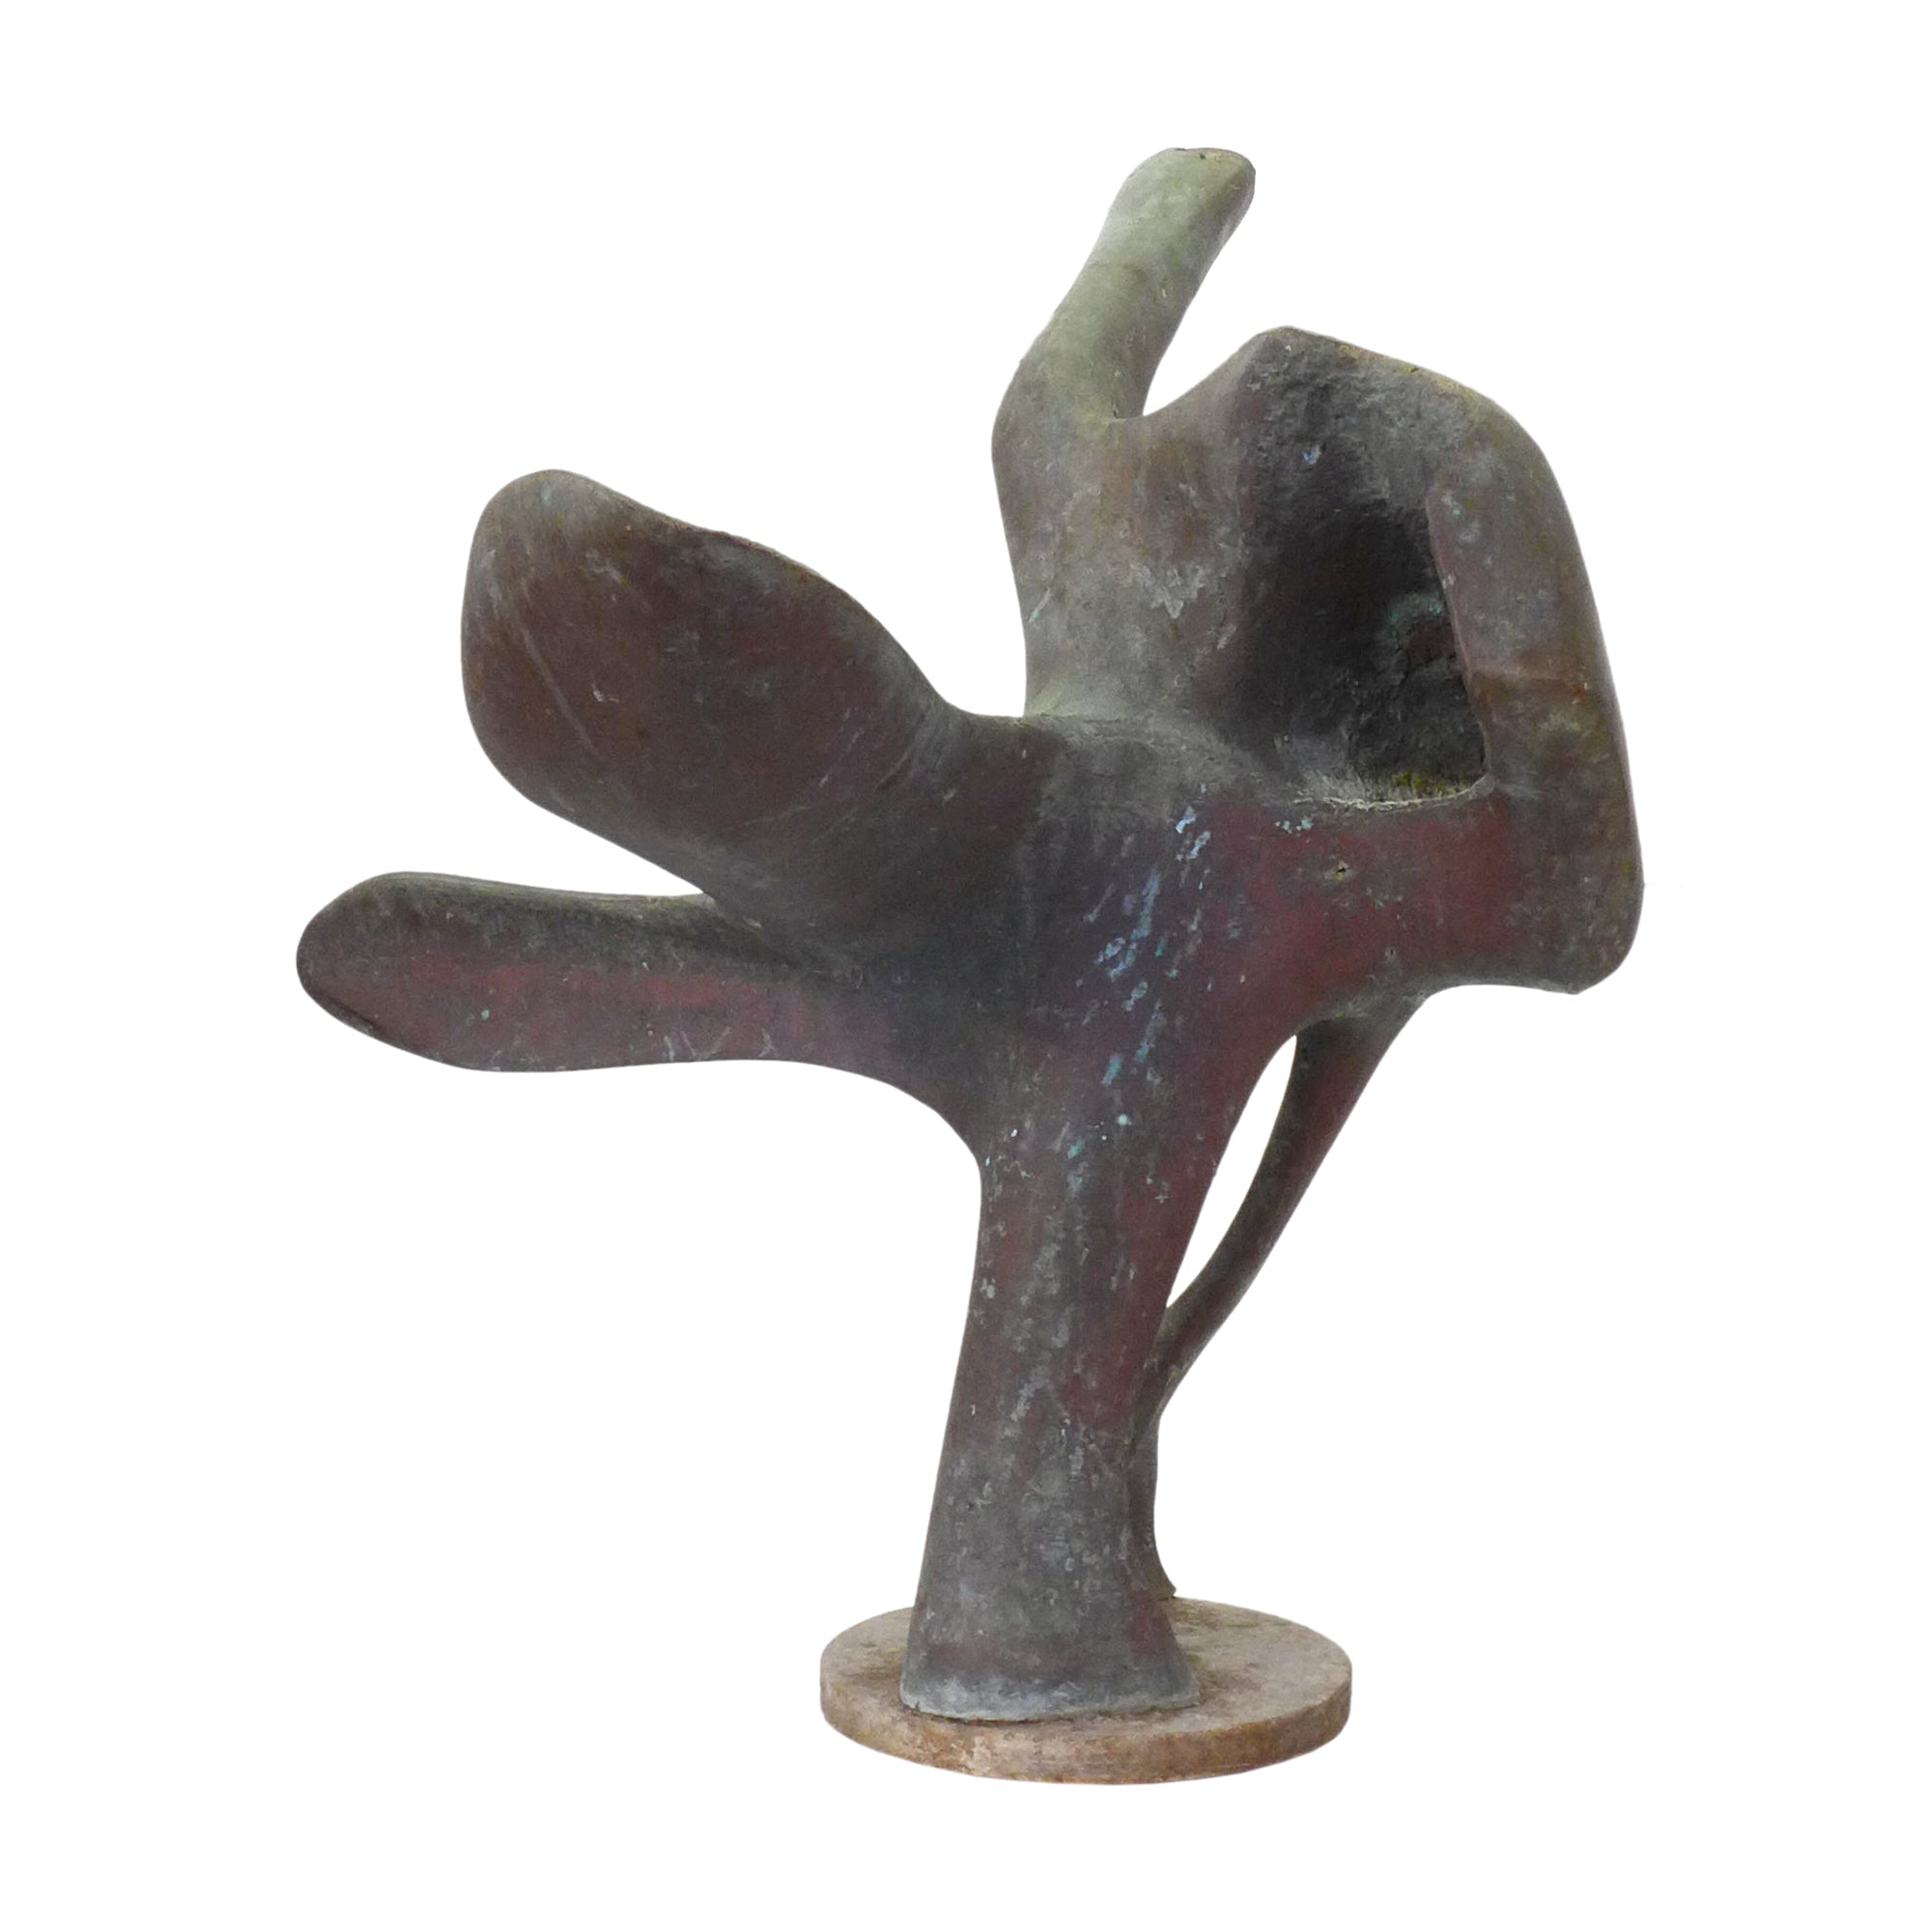 Abstract Expressionist Cast Bronze Sculpture